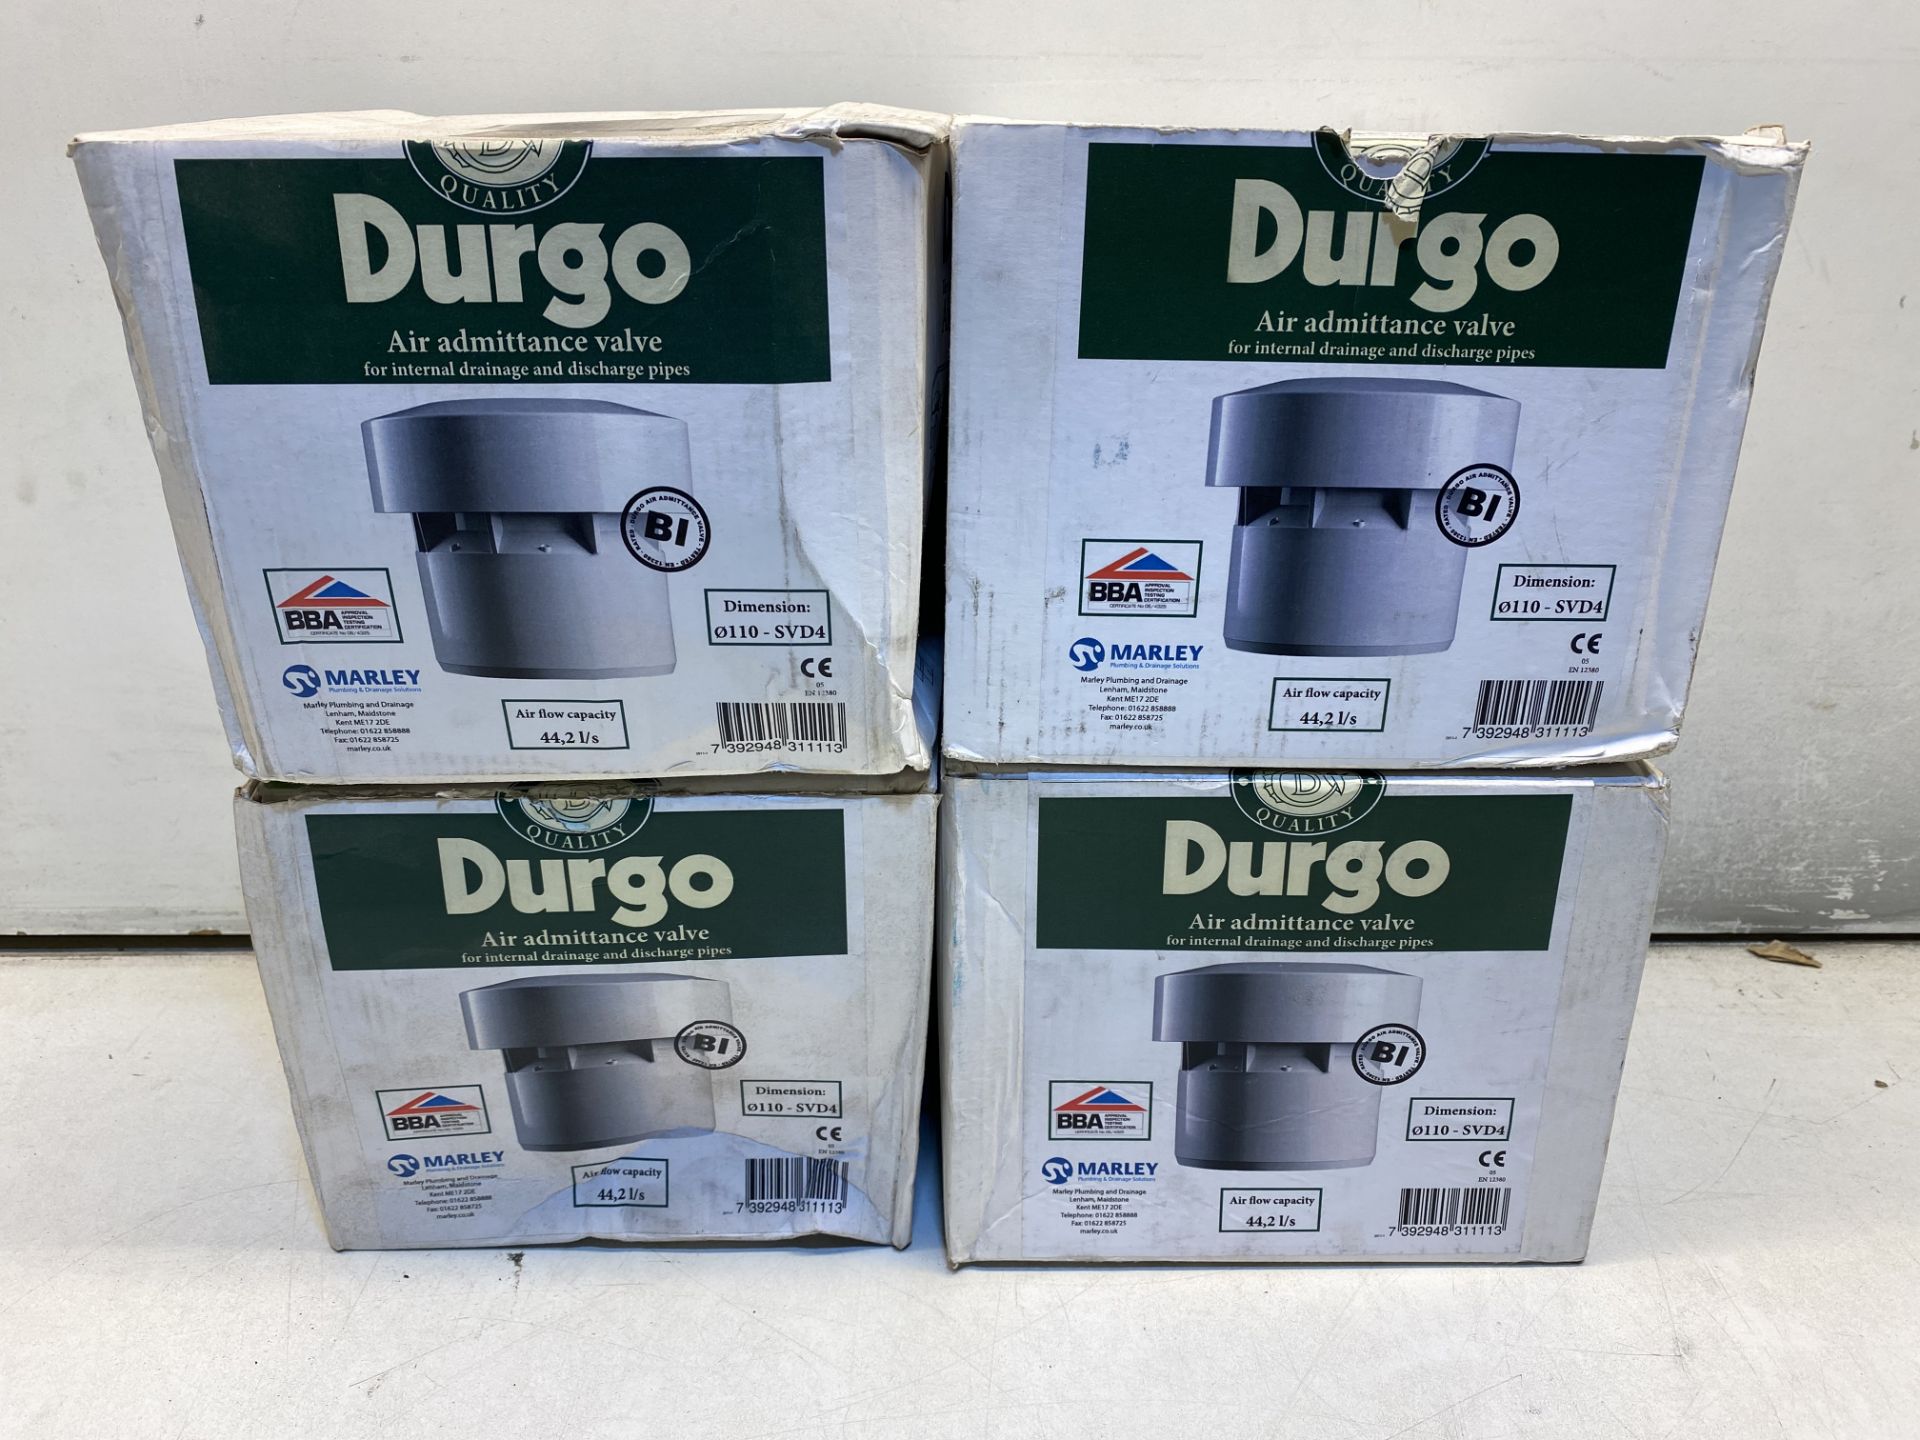 4 x DURGO FITS 4" PIPE AIR ADMITTANCE VALVES - Image 2 of 3